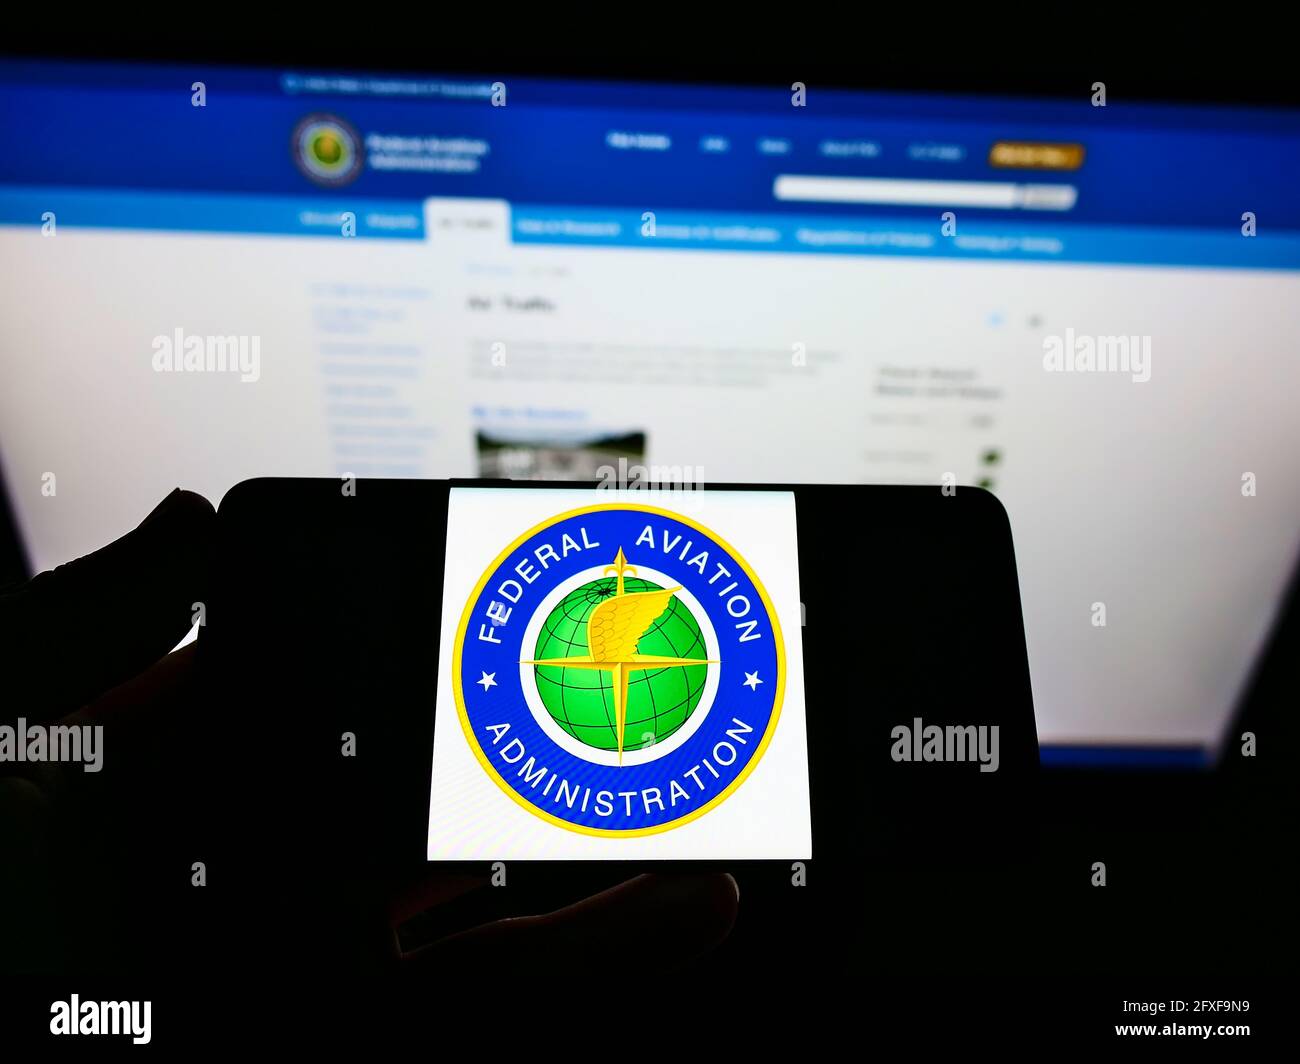 Person holding cellphone with seal of American agency Federal Aviation Administration (FAA) on screen in front of web page. Focus on phone display. Stock Photo